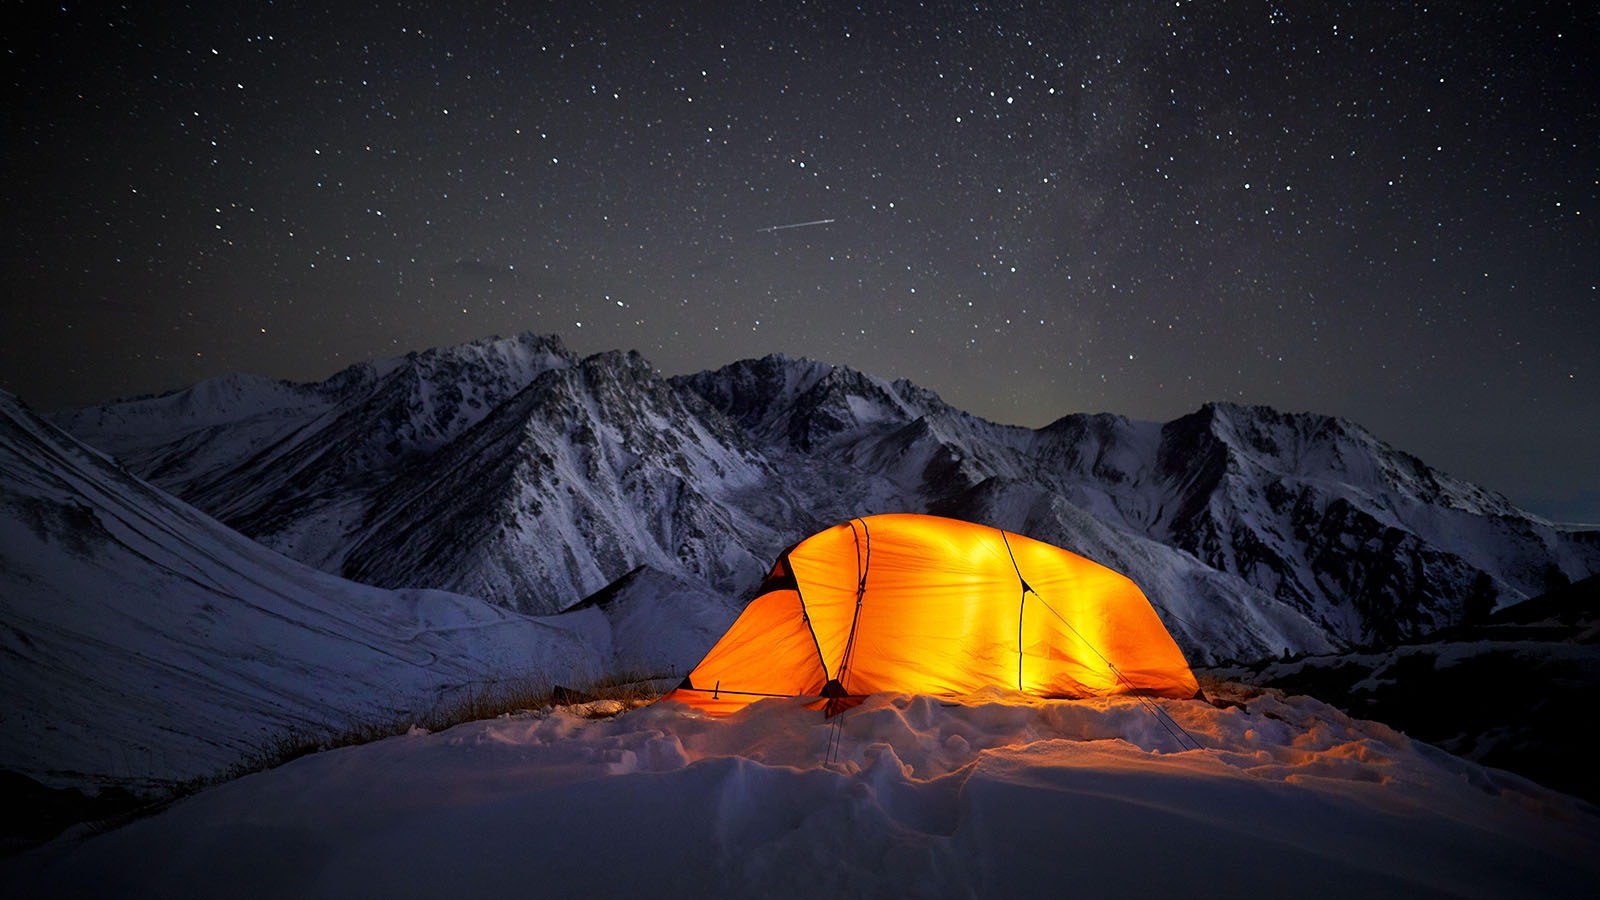 Avalanche Outdoor Supply Co. - Camping can get a little in-tents